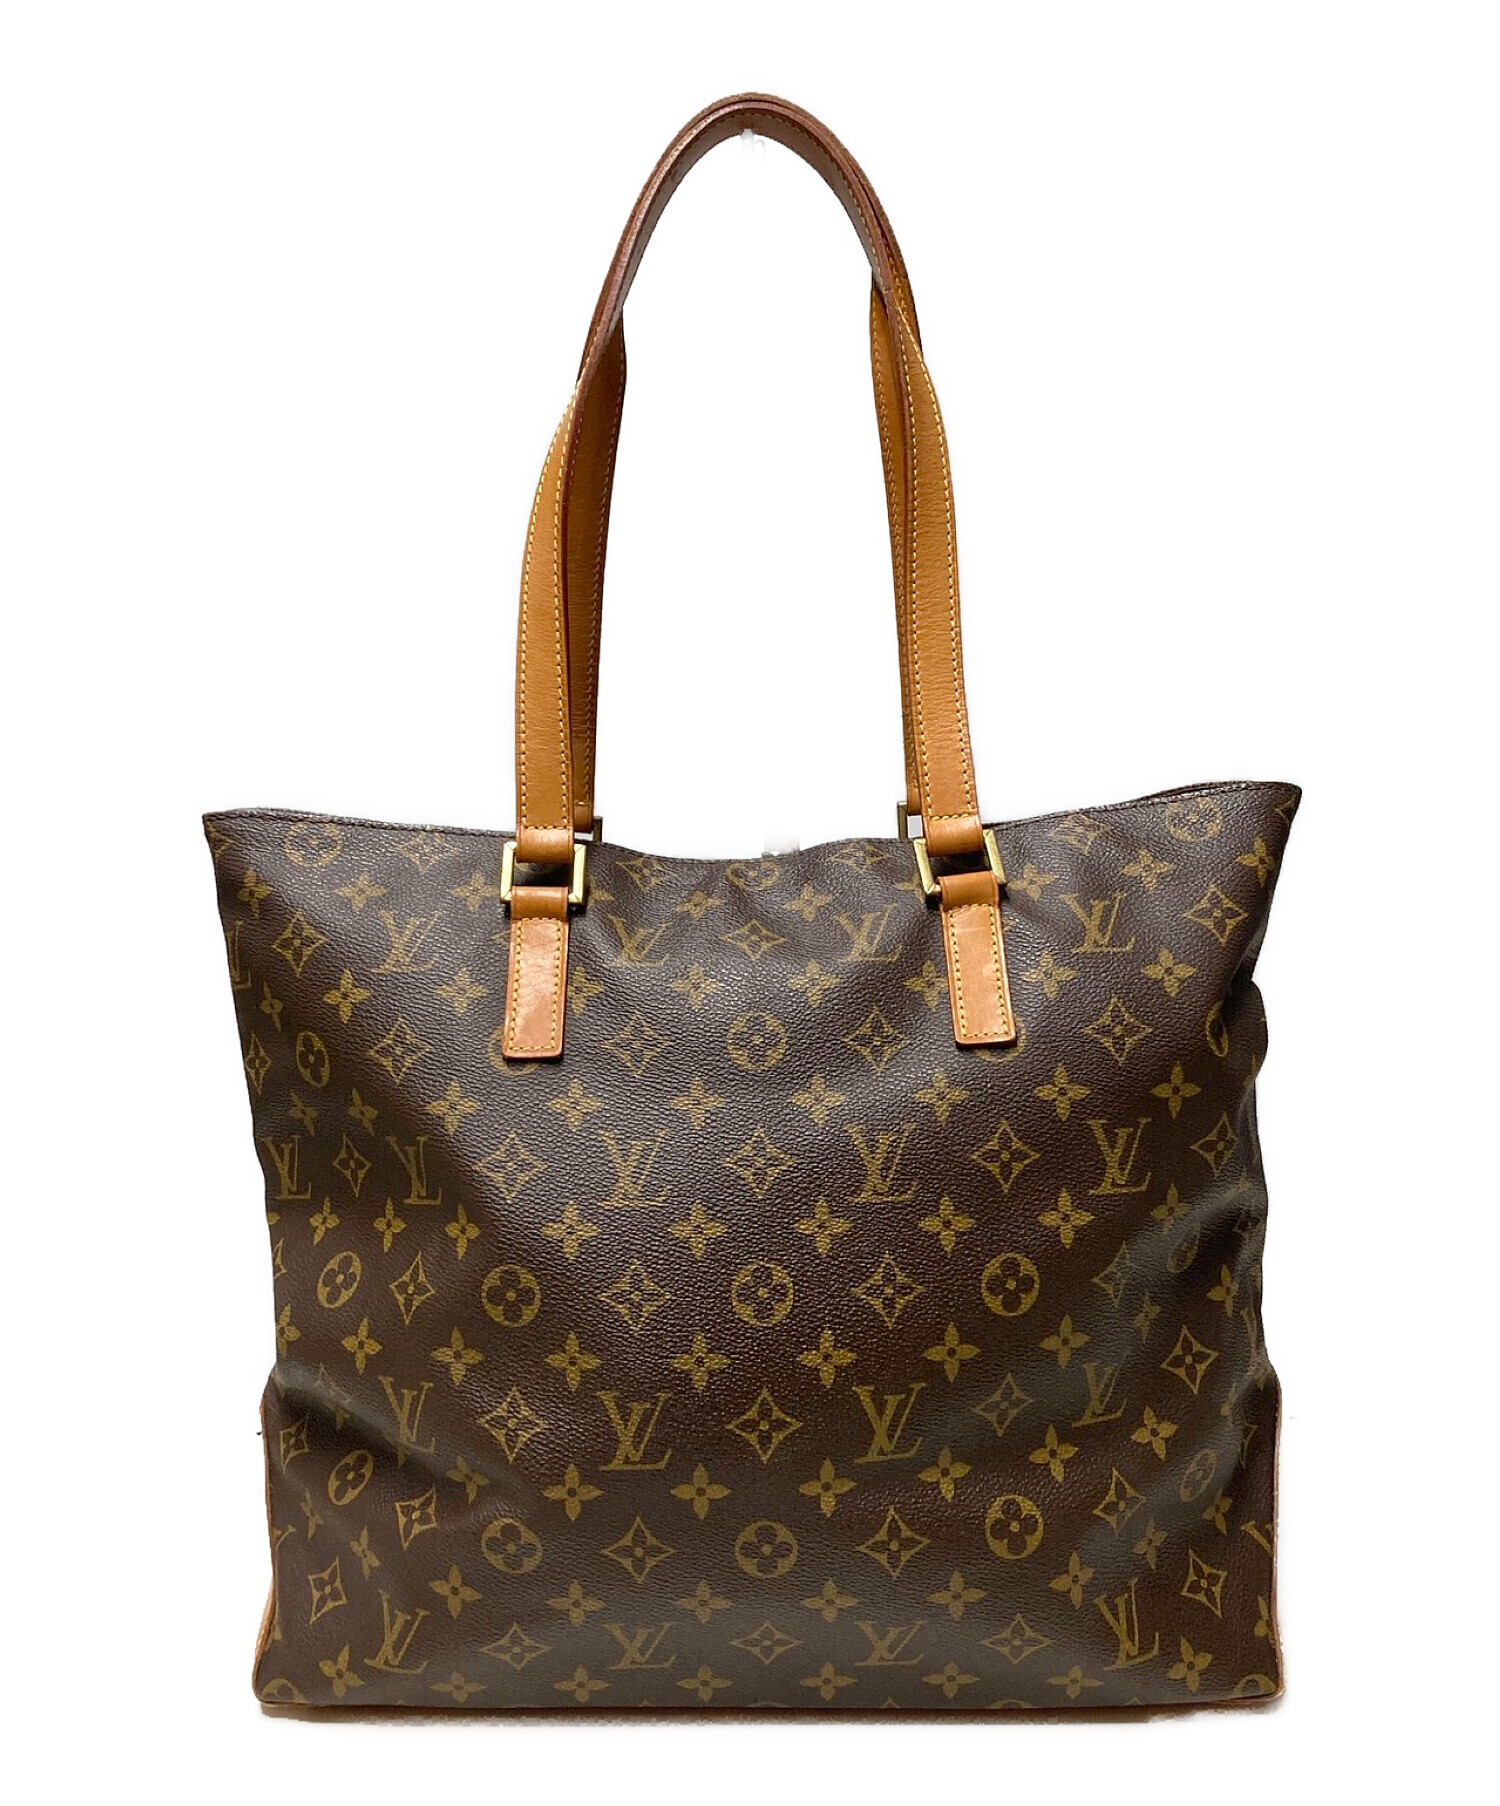 LOUIS VUITTON★ルイヴィトン★カバメゾ★バッグ★